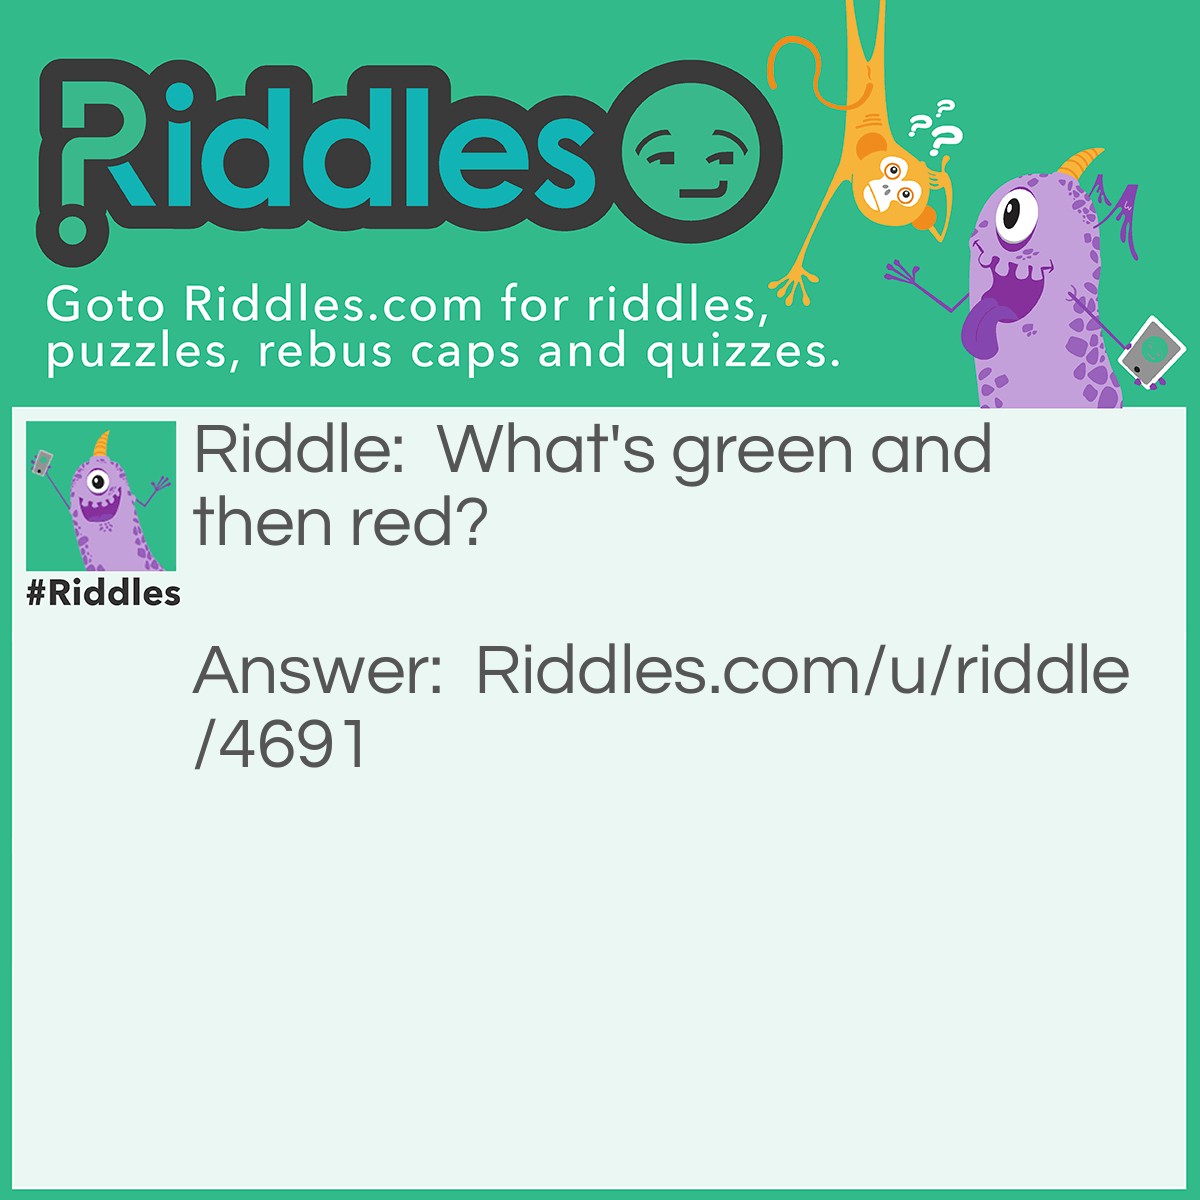 Riddle: What's green and then red? Answer: A frog in a blender.